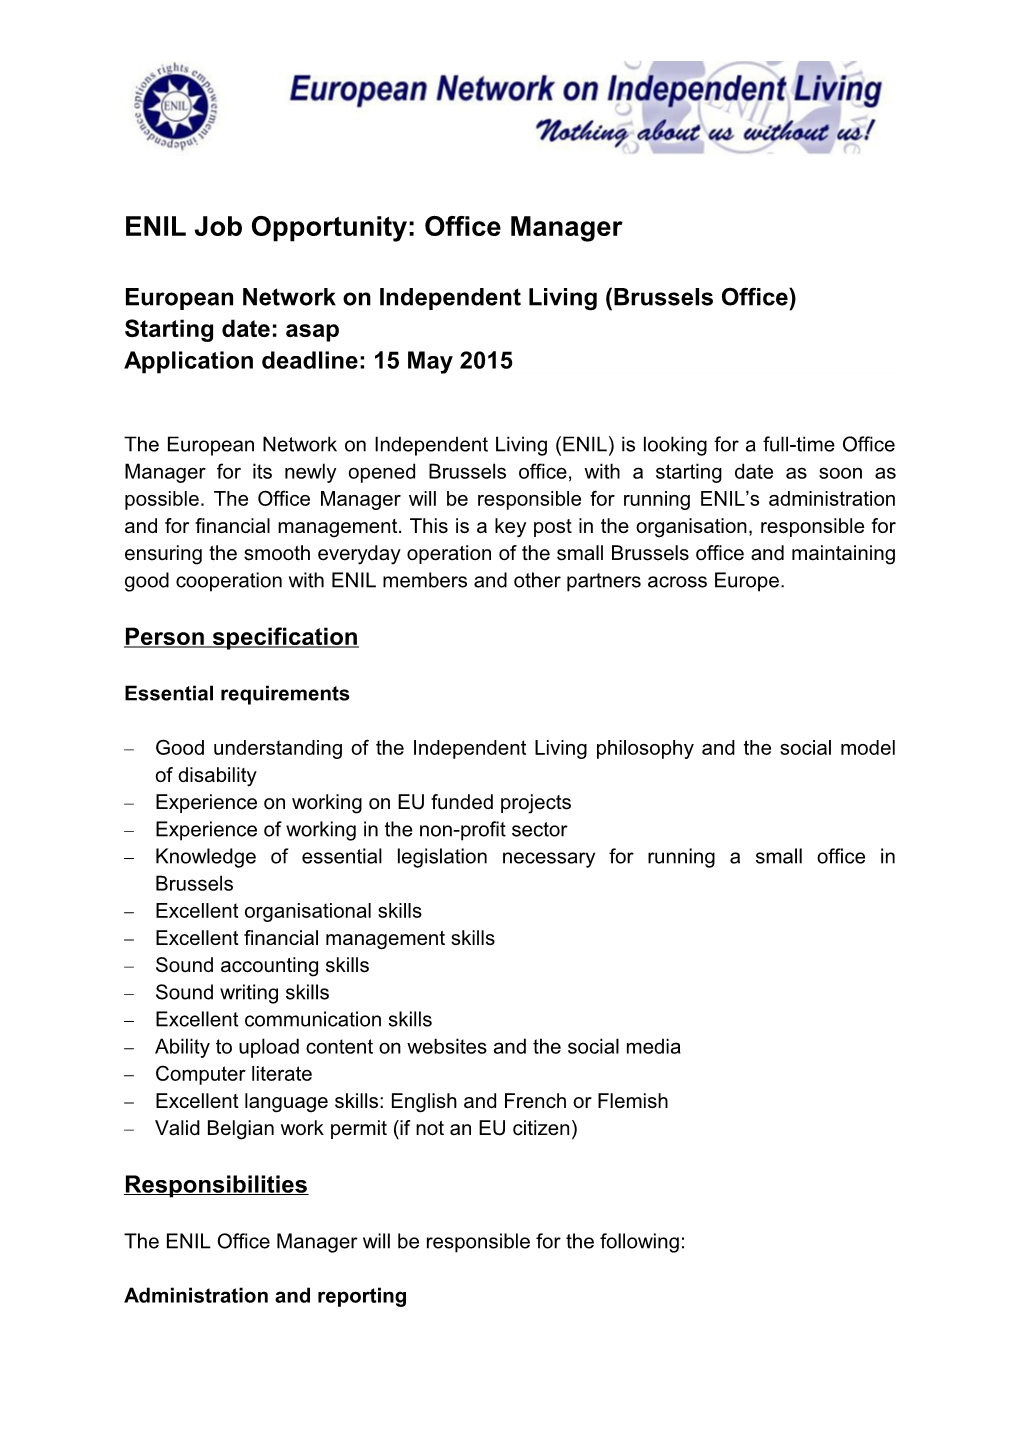 ENIL Job Opportunity: Office Manager